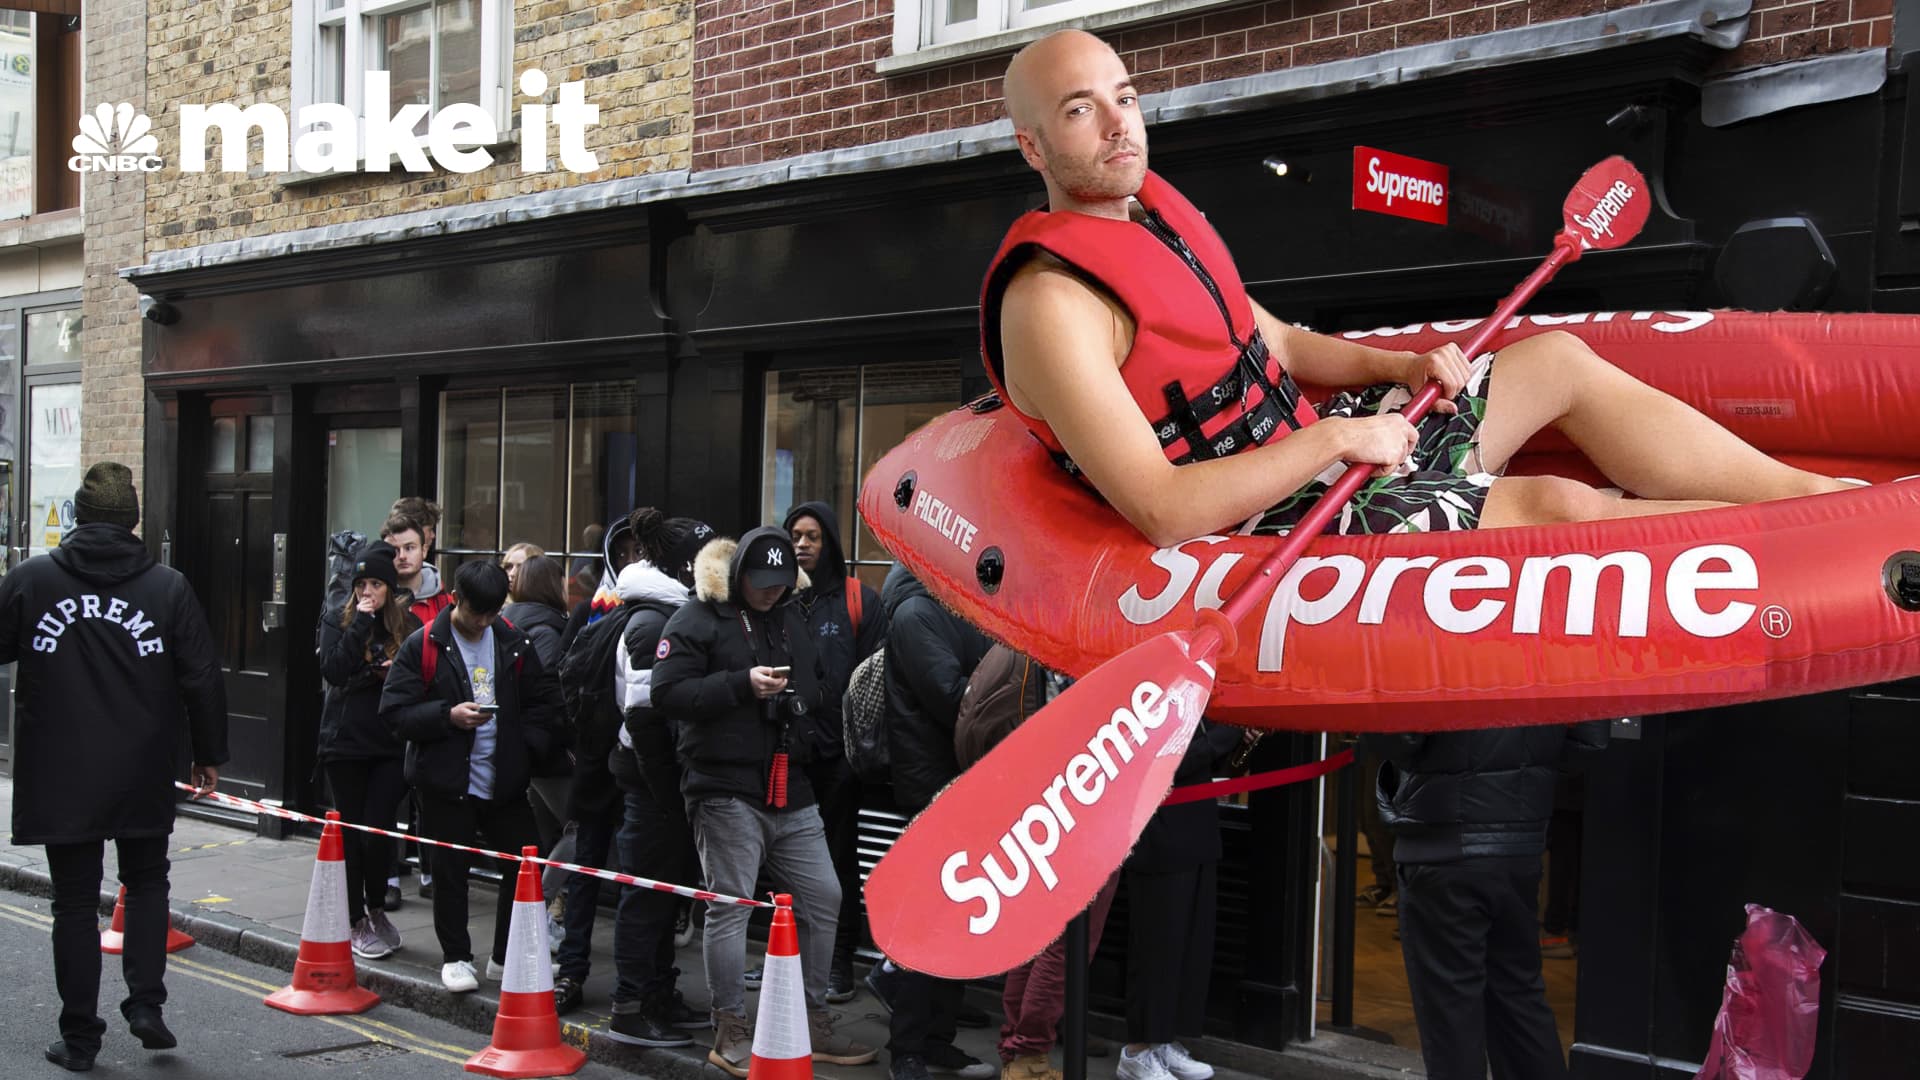 How Supreme went from a small NYC skateboard shop to a $1 billion global  phenomenon